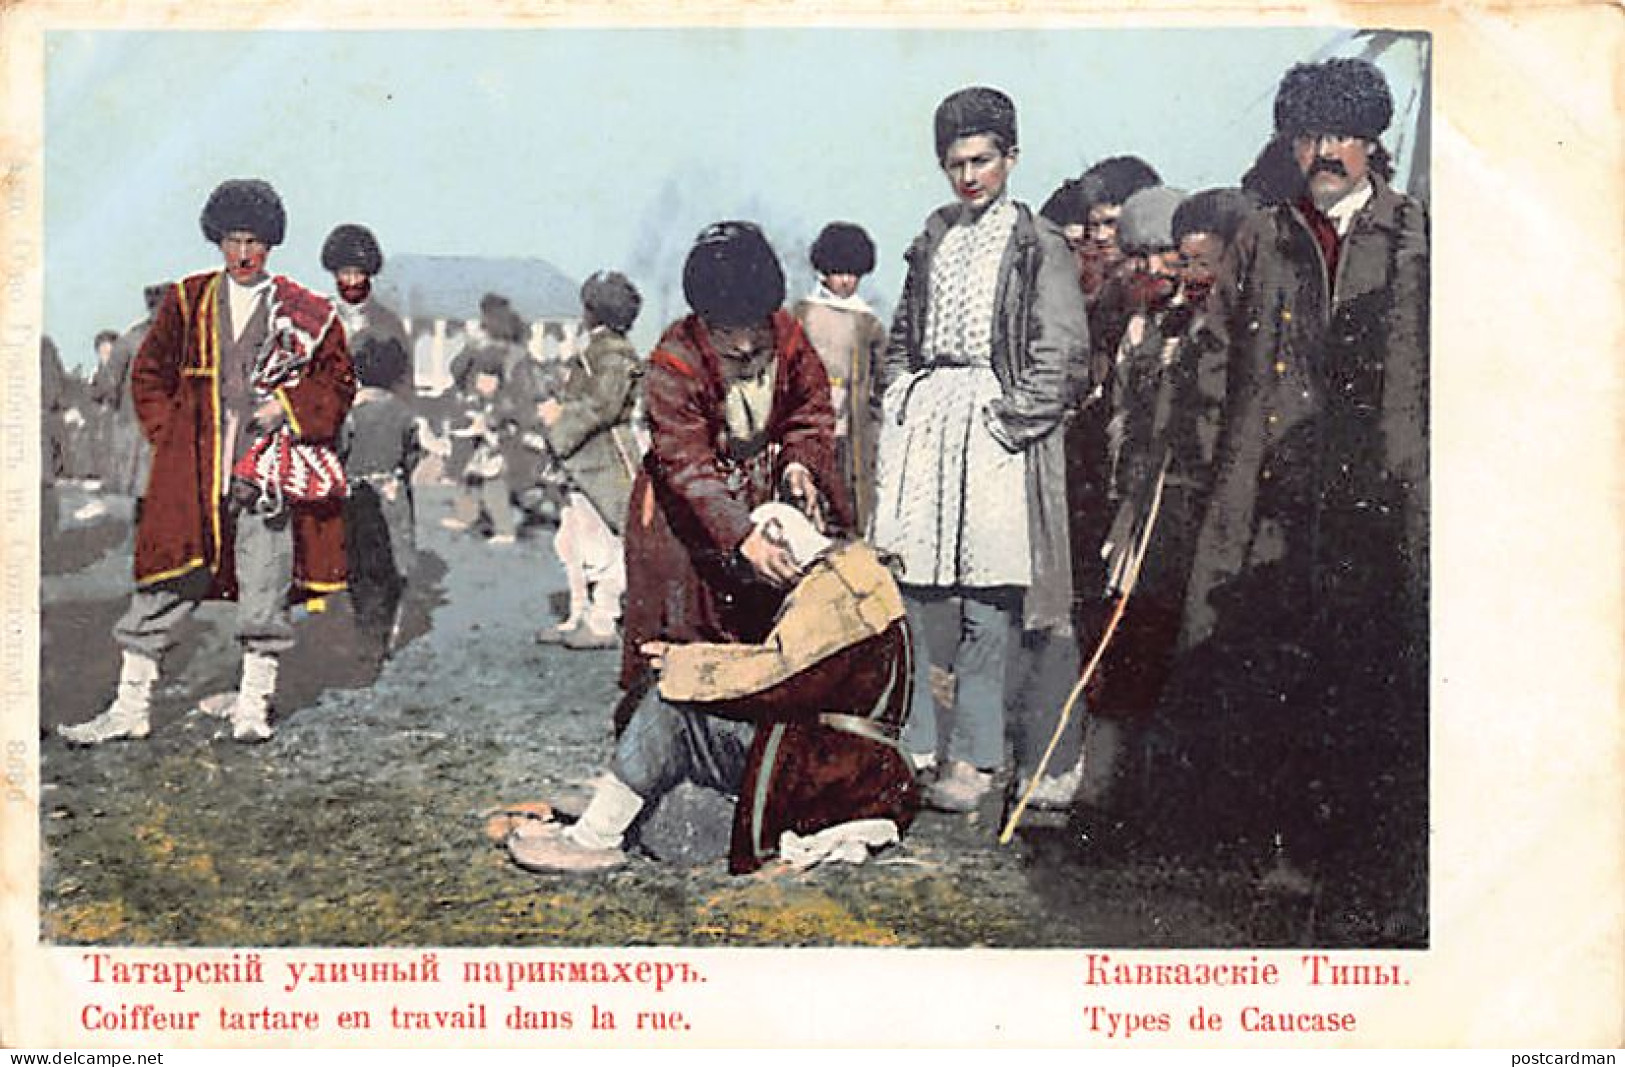 Russia - Types Of Caucasus - Tartar Hairdresser At Work On The Street - Publ. Granberg 8588 - Russia